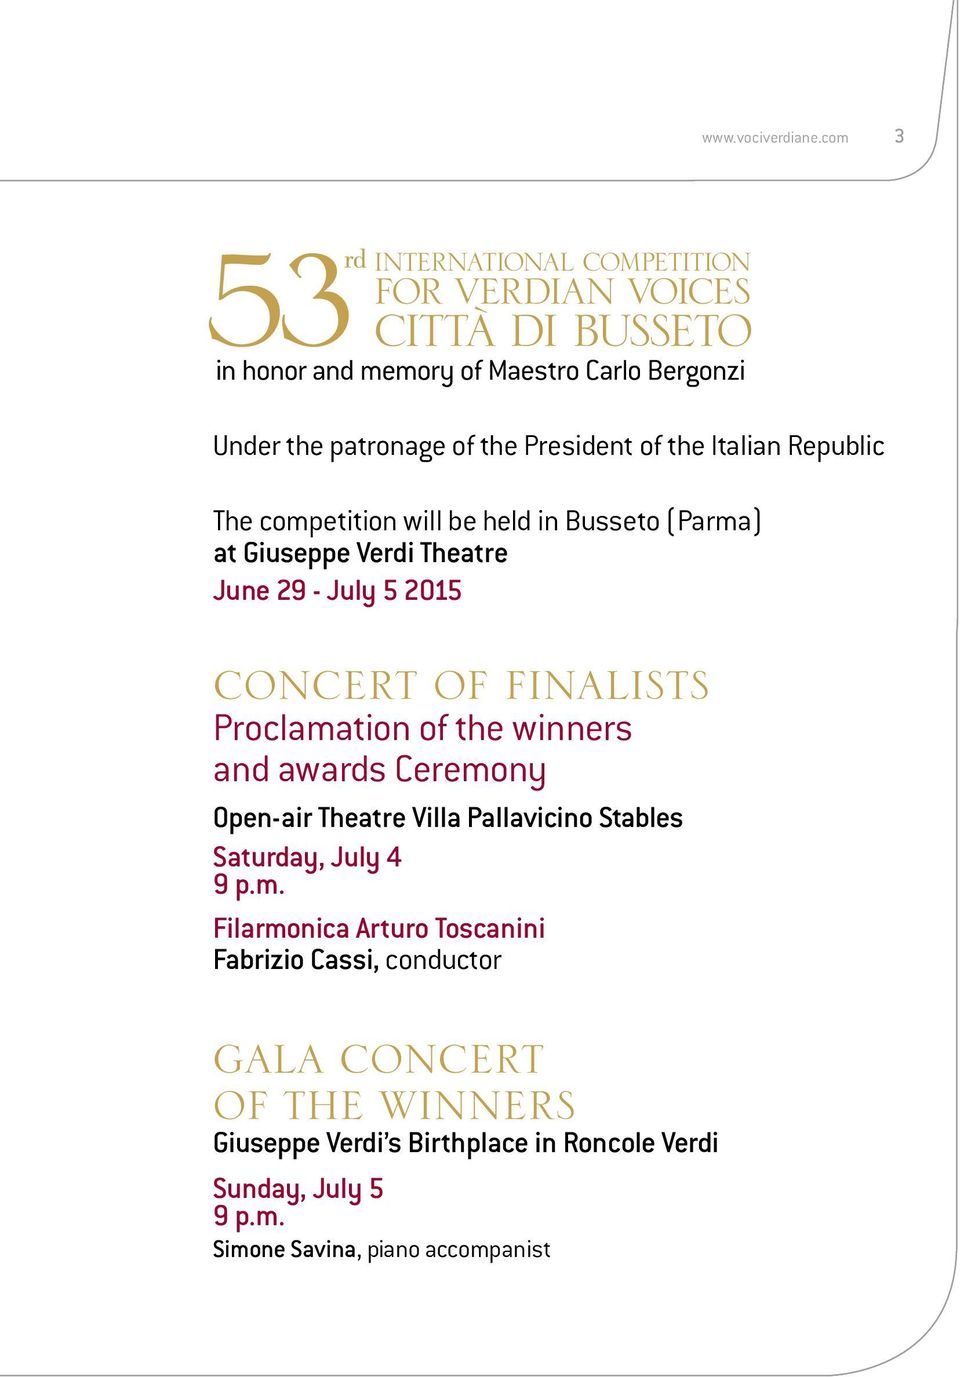 competition will be held in Busseto (Parma) at Giuseppe Verdi Theatre June 29 - July 5 2015 CONCERT OF FINALISTS Proclamation of the